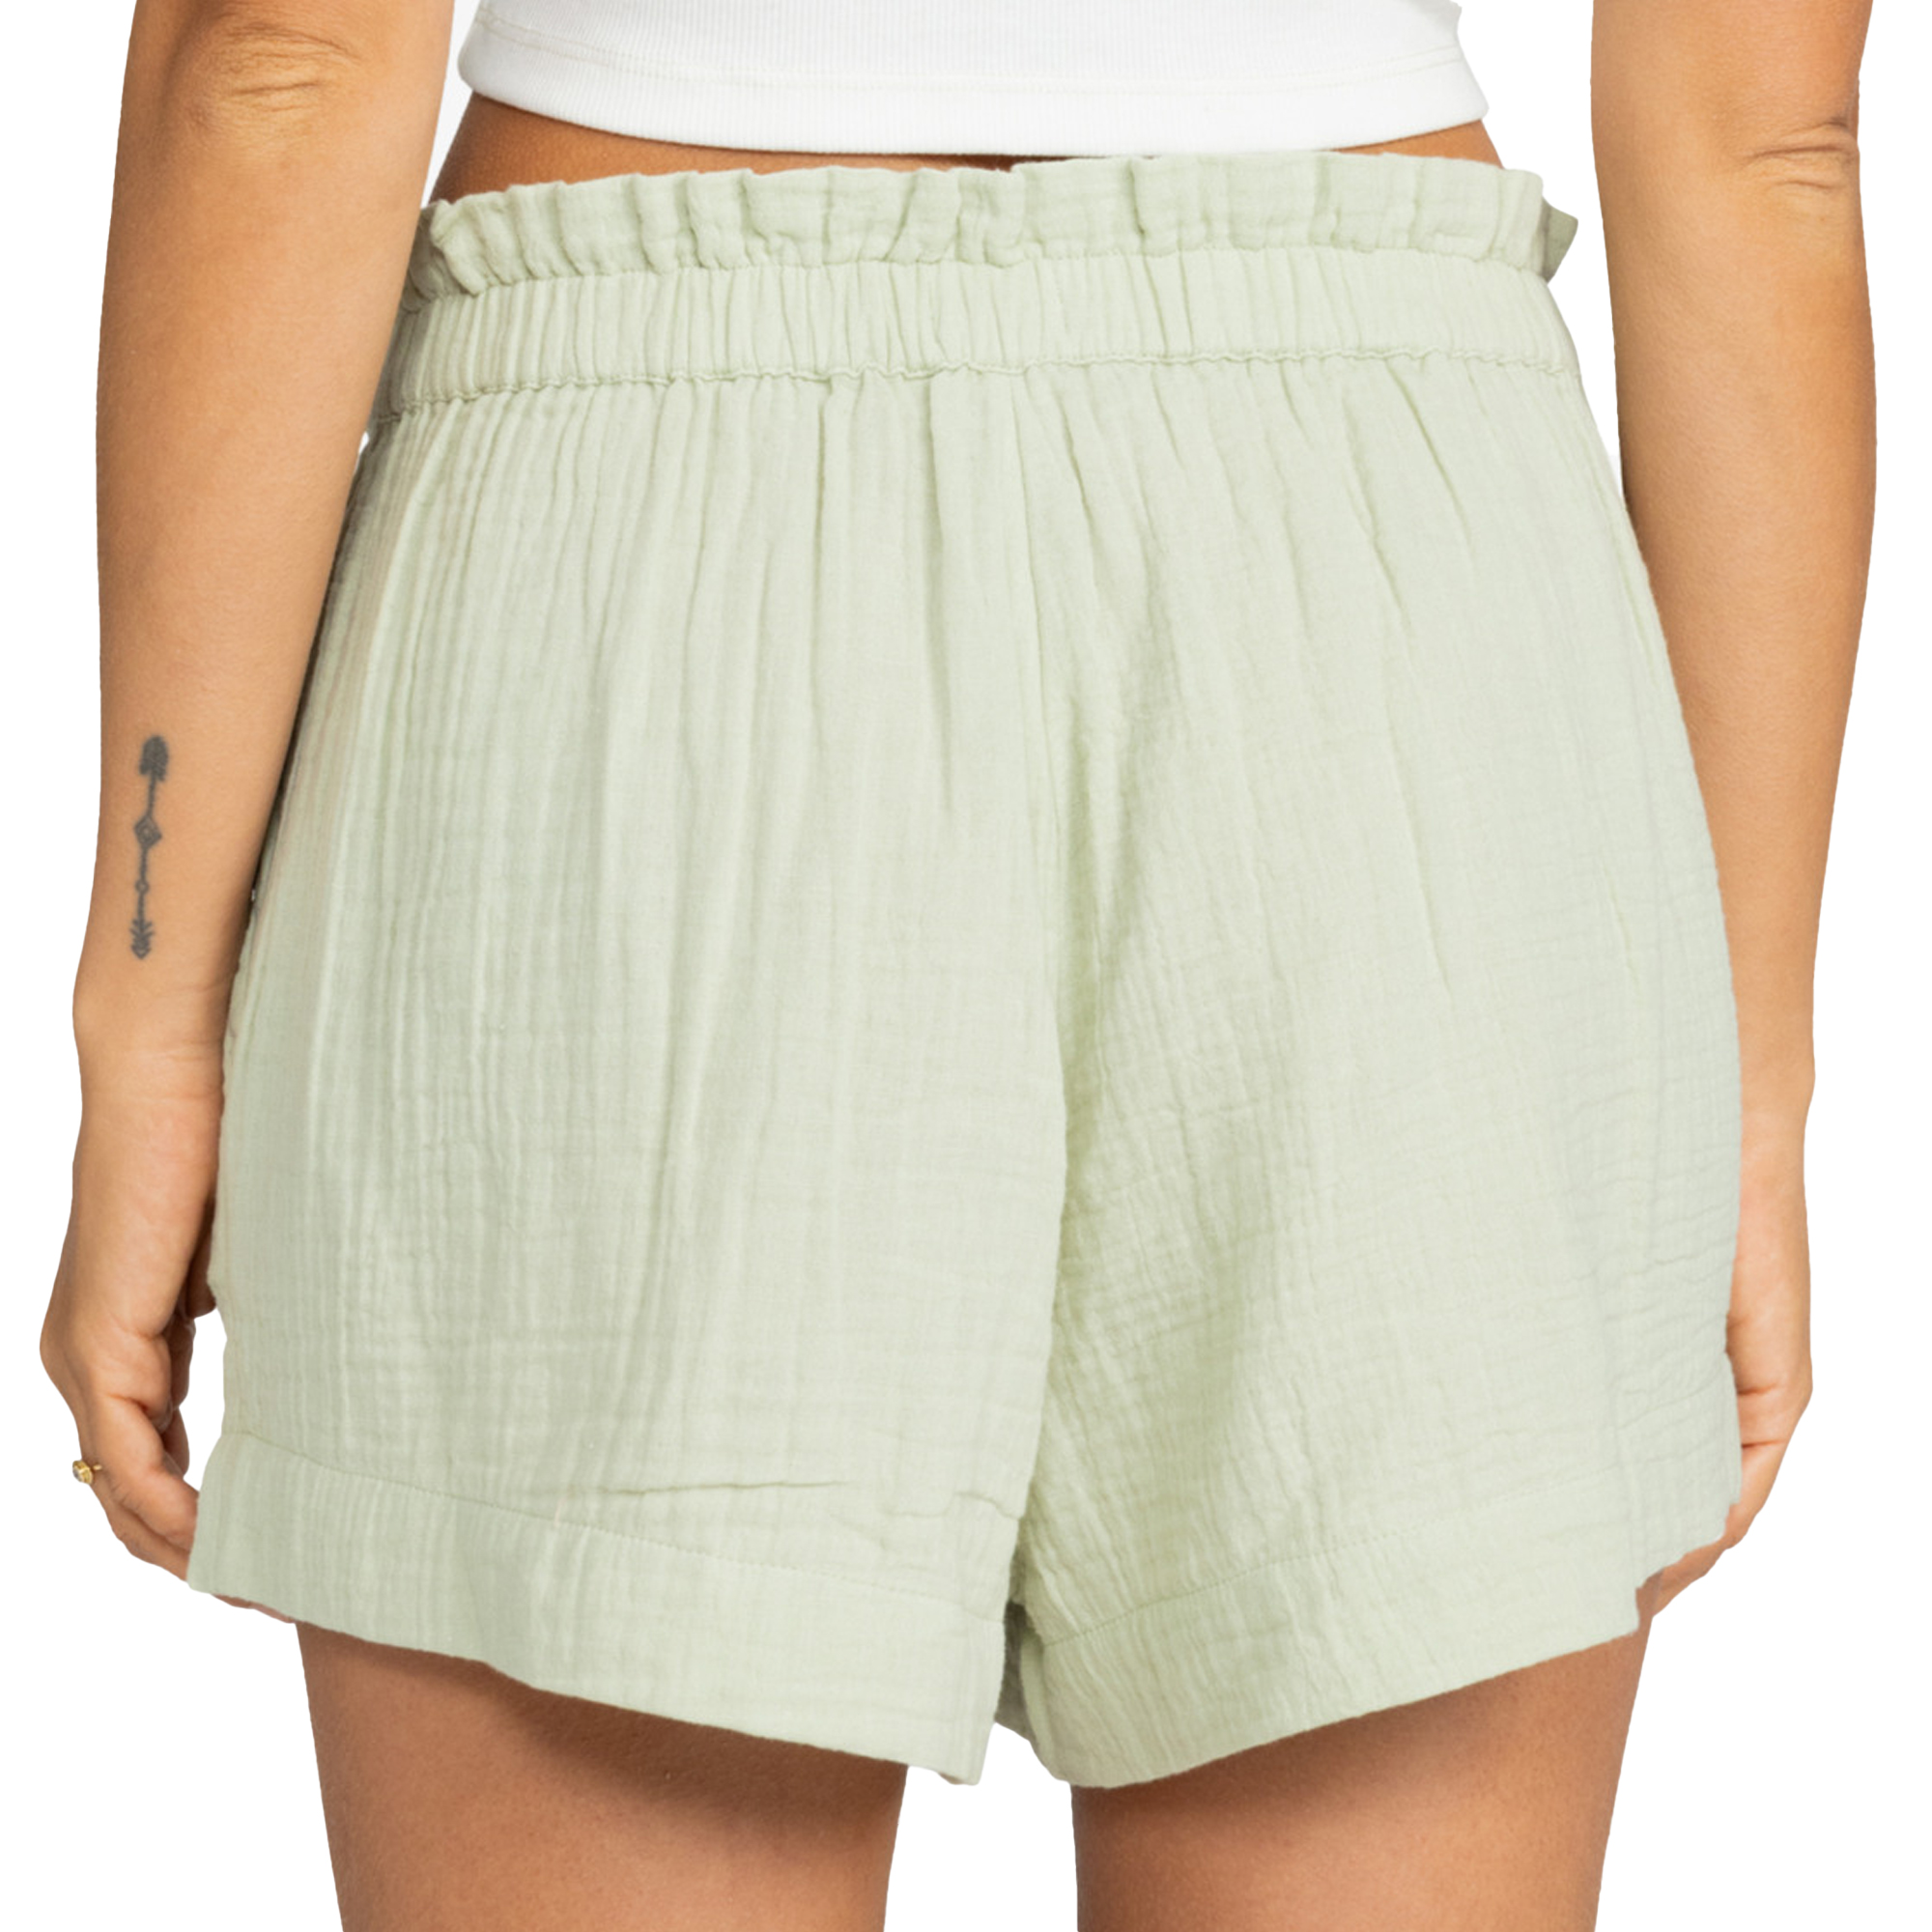 Comfortable and soft shorts